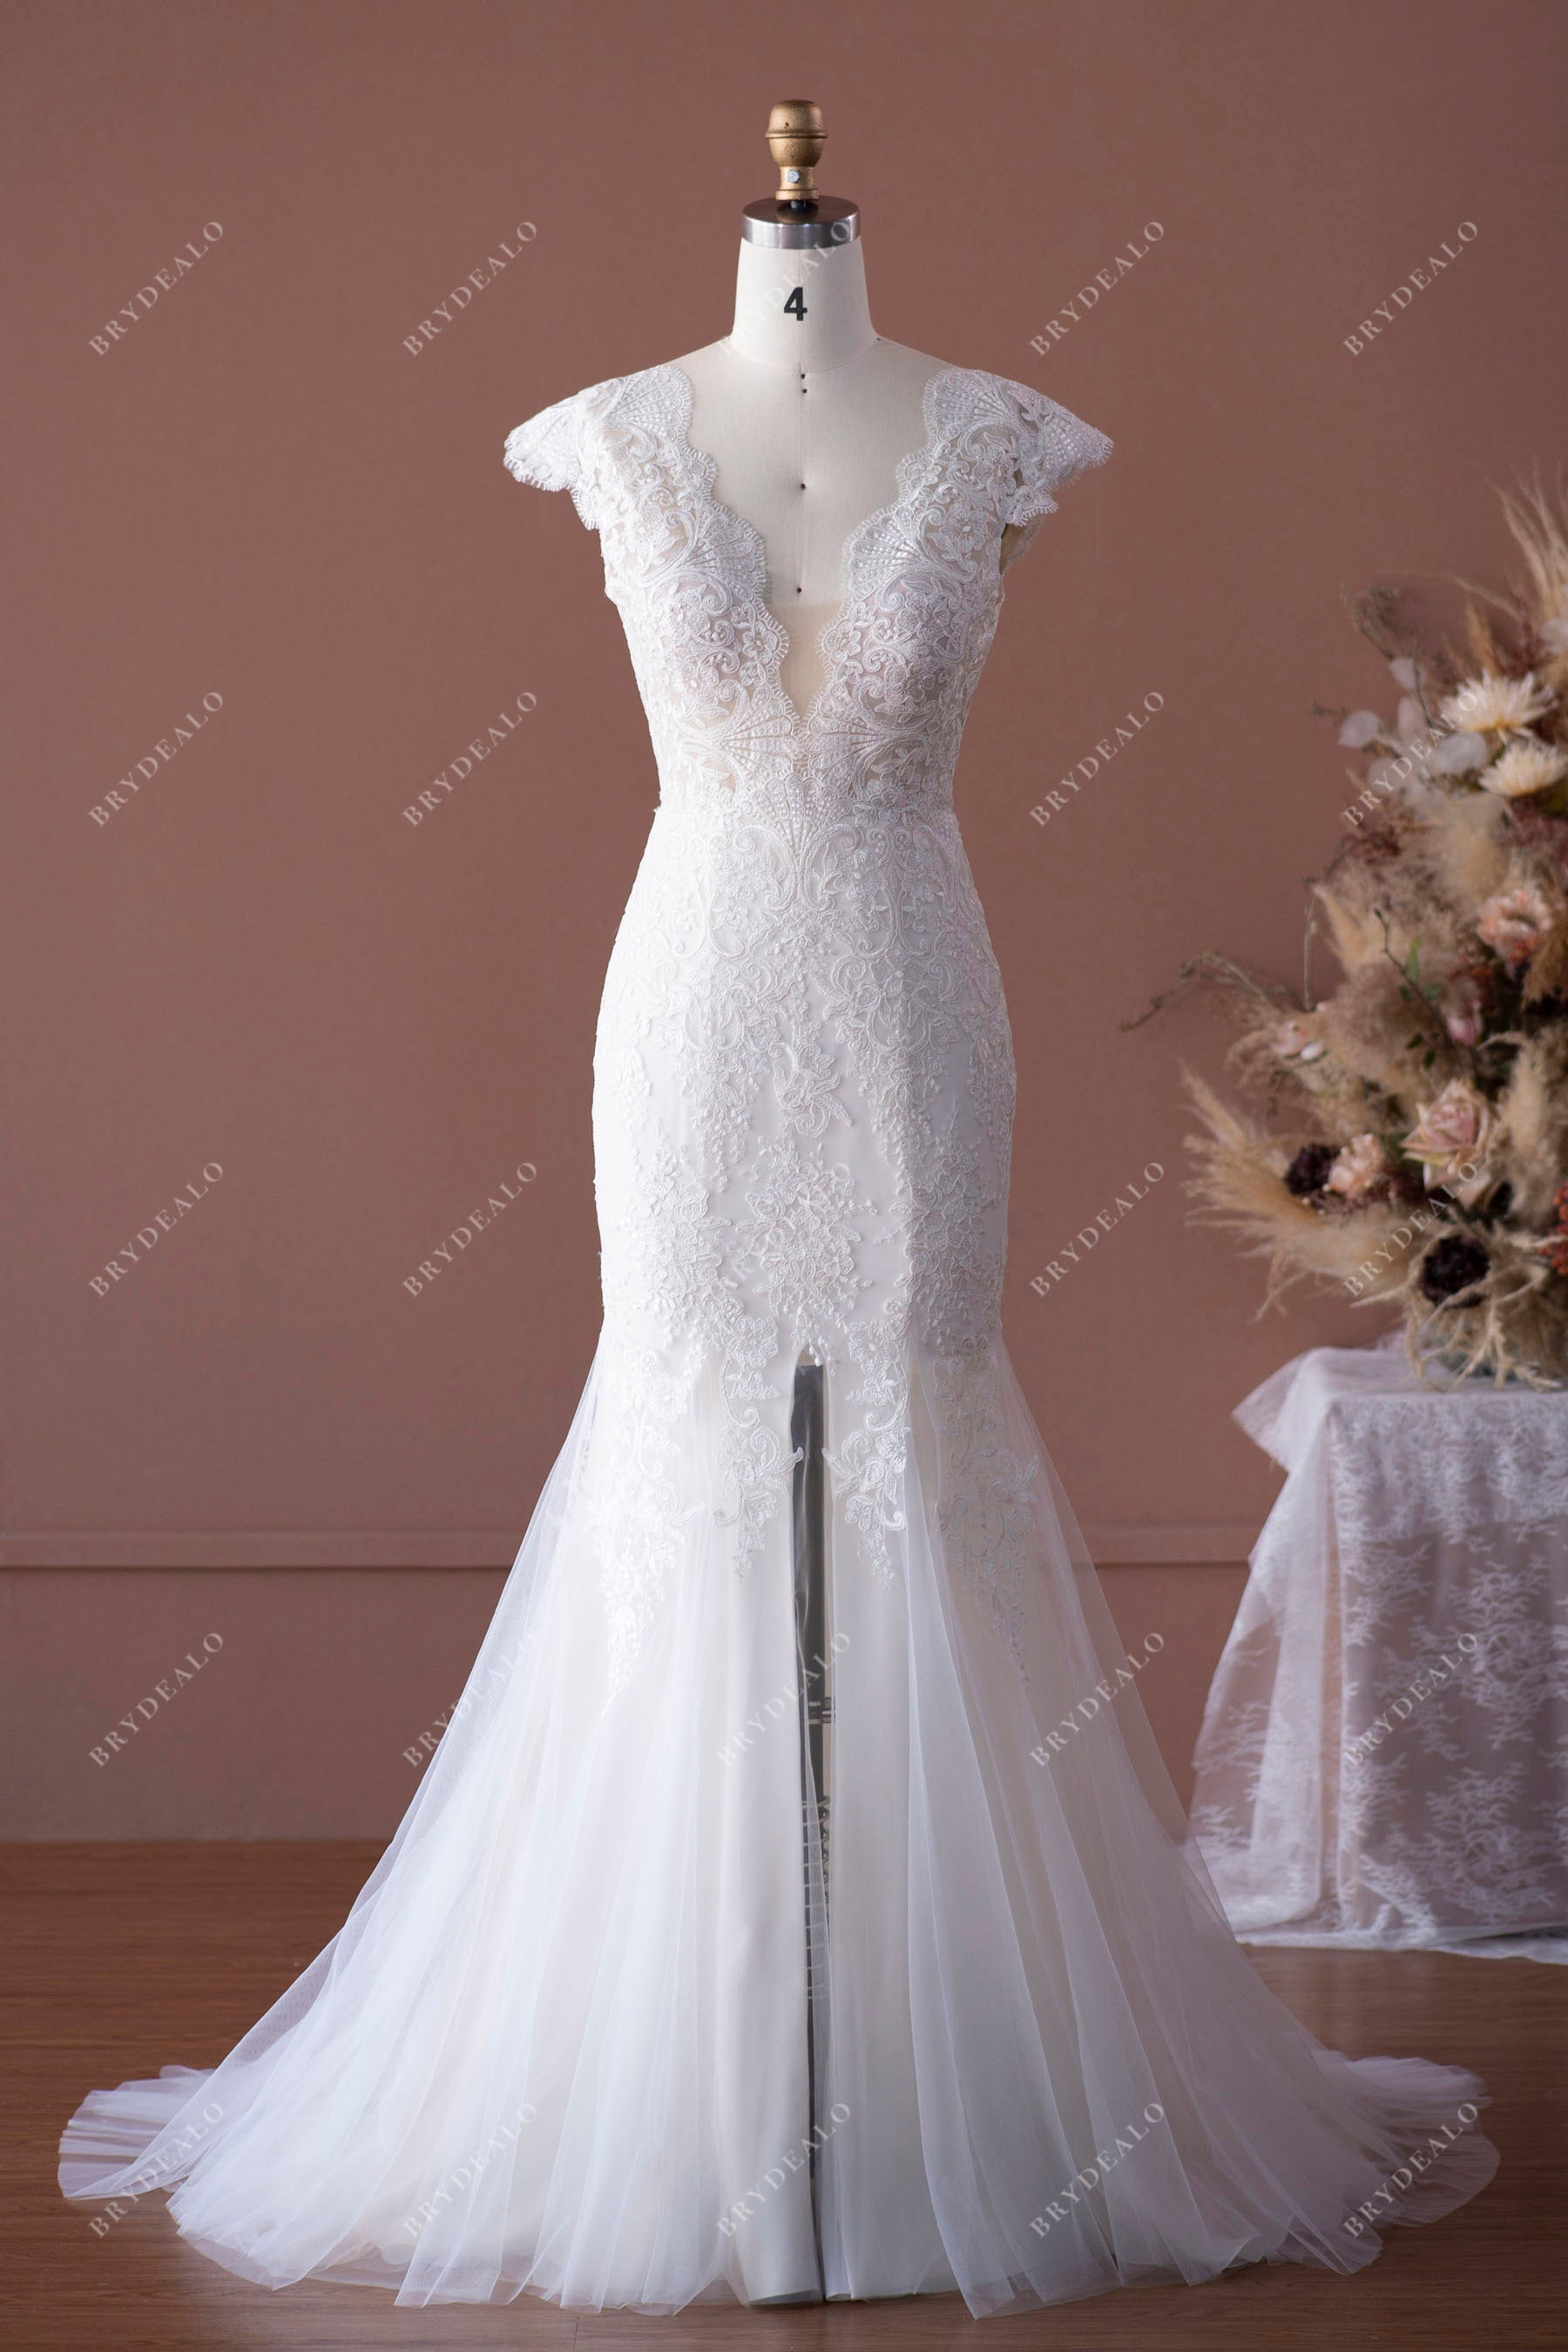 Cap Sleeve Scallop Lace Neck Slit Fit and Flare Wedding Dress